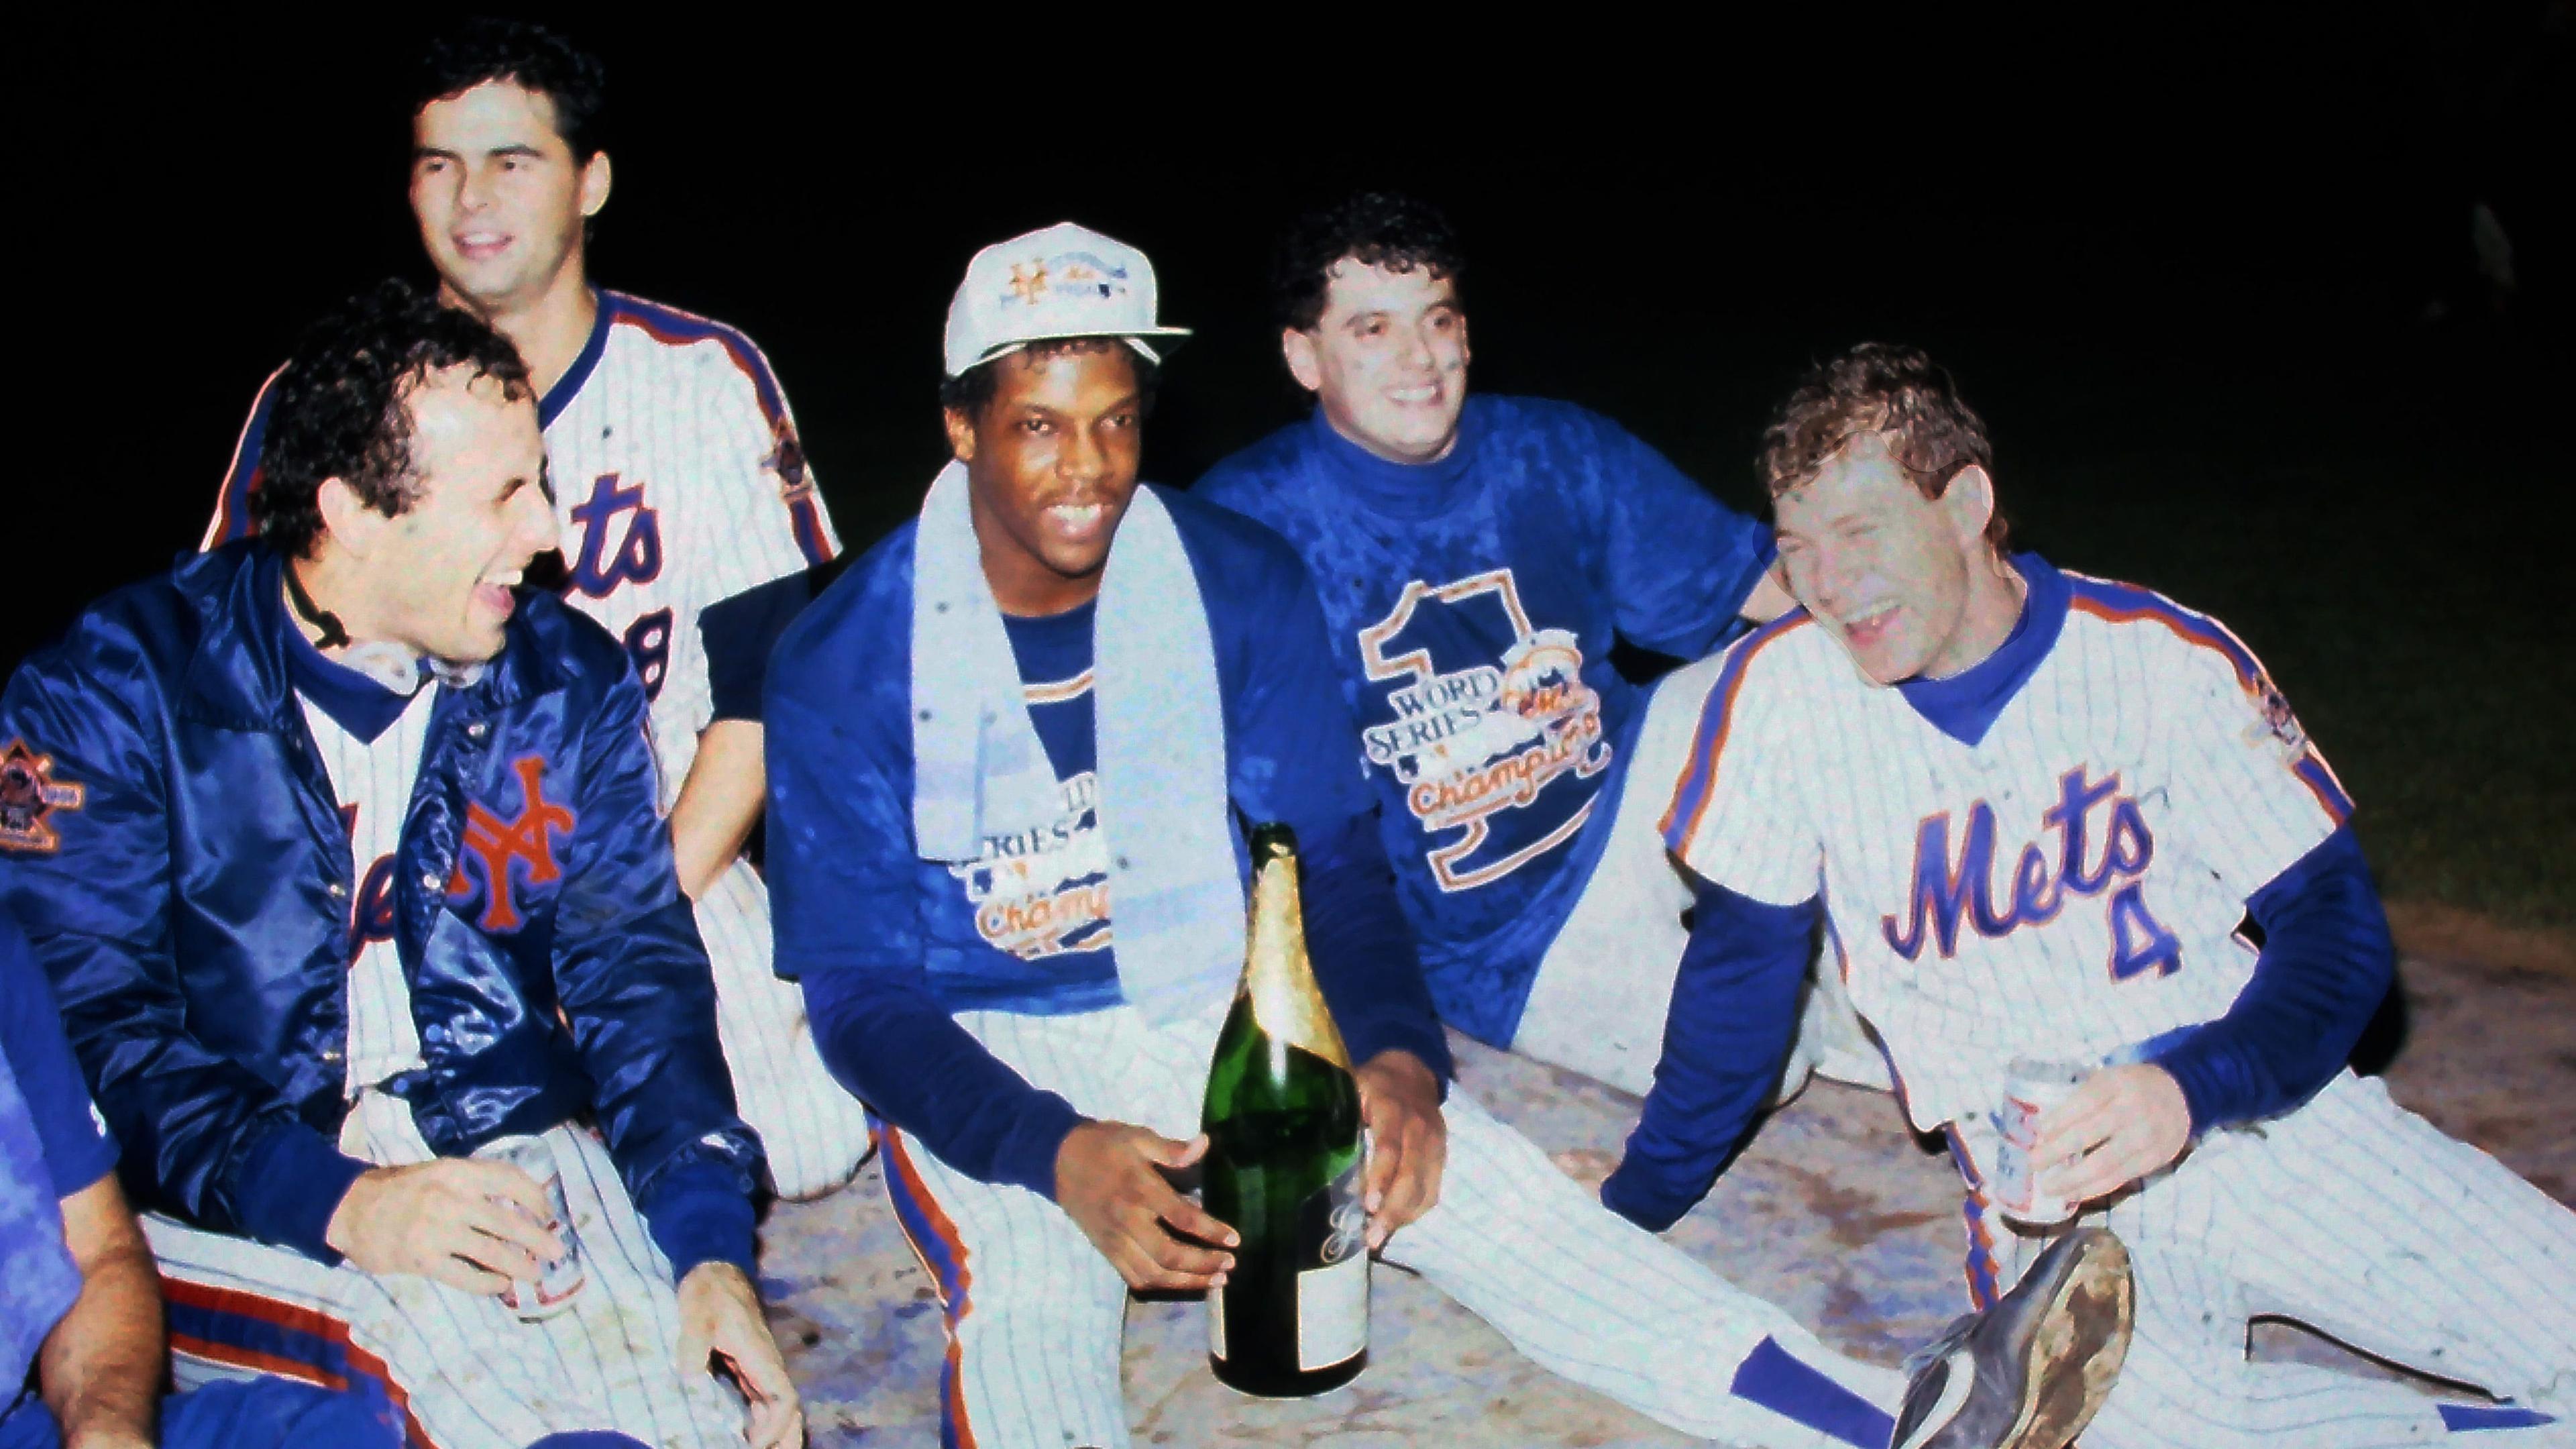 Bob Ojeda, Rick Aguilera, Dwight Gooden, and Lenny Dykstra celebrate on the field after defeating the Red Sox in Game 7 to win the World Series at Shea Stadium Oct. 27, 1986. Mets Vs Red Sox 1986 World Series / Frank Becerra Jr/USA TODAY / USA TODAY NETWORK